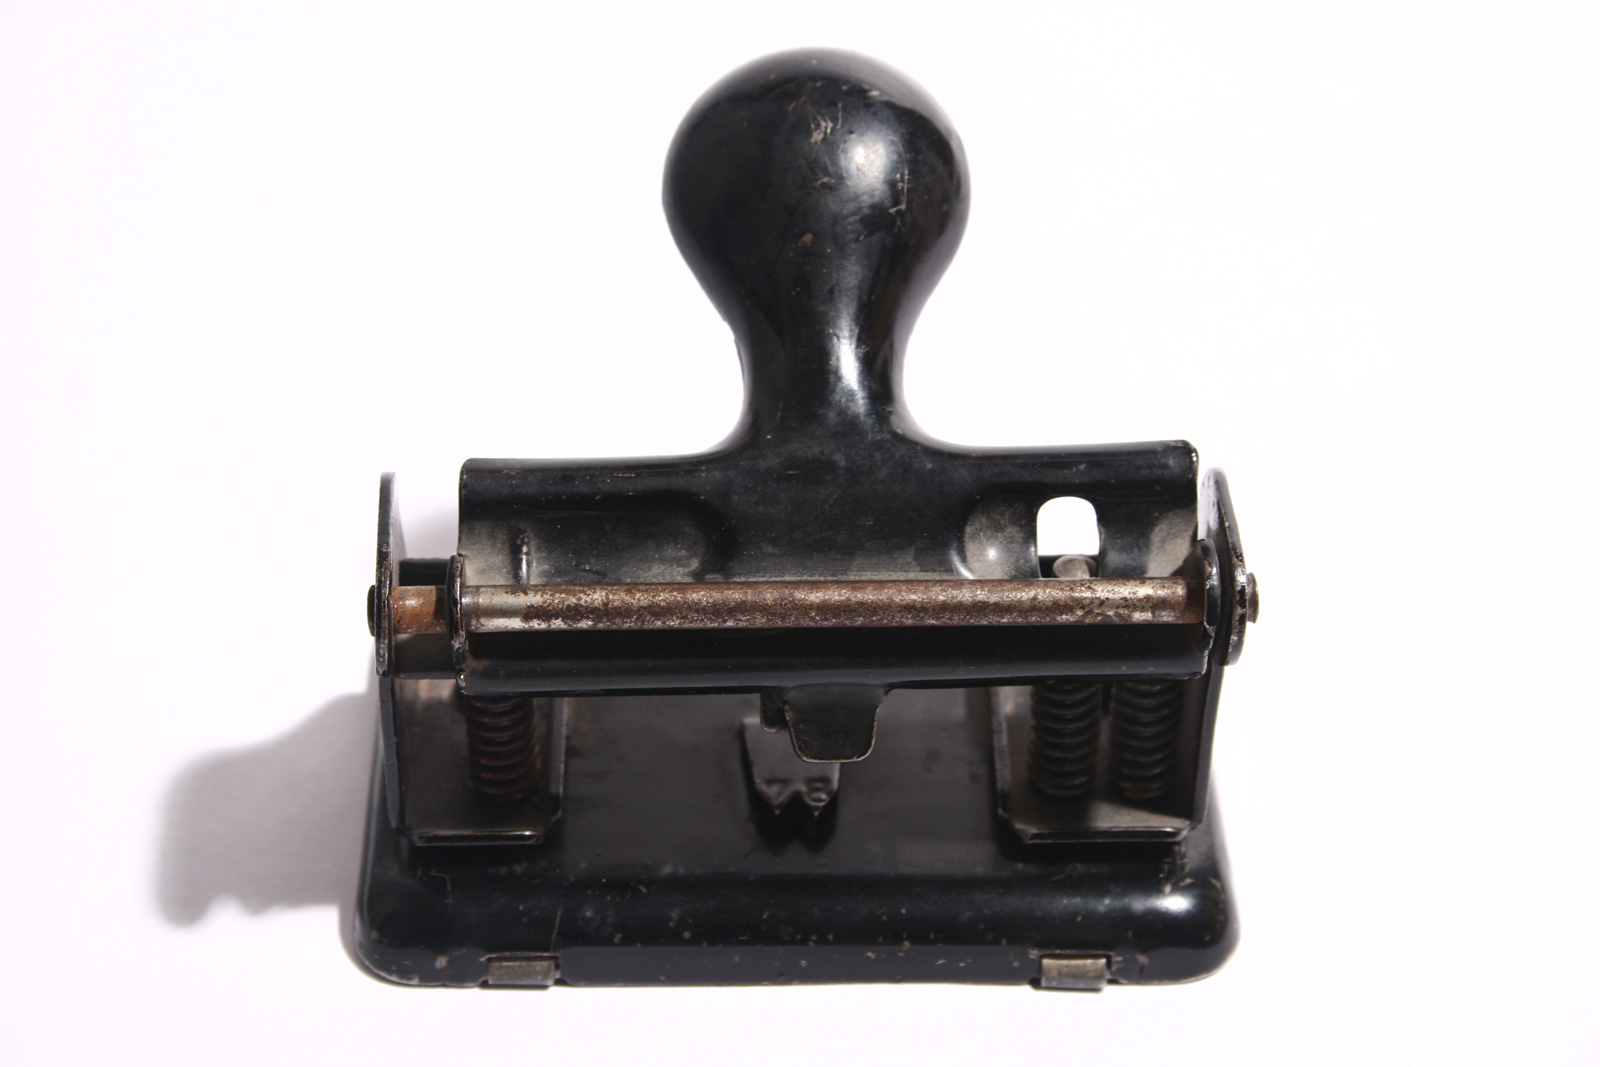 Old rusty hole puncher